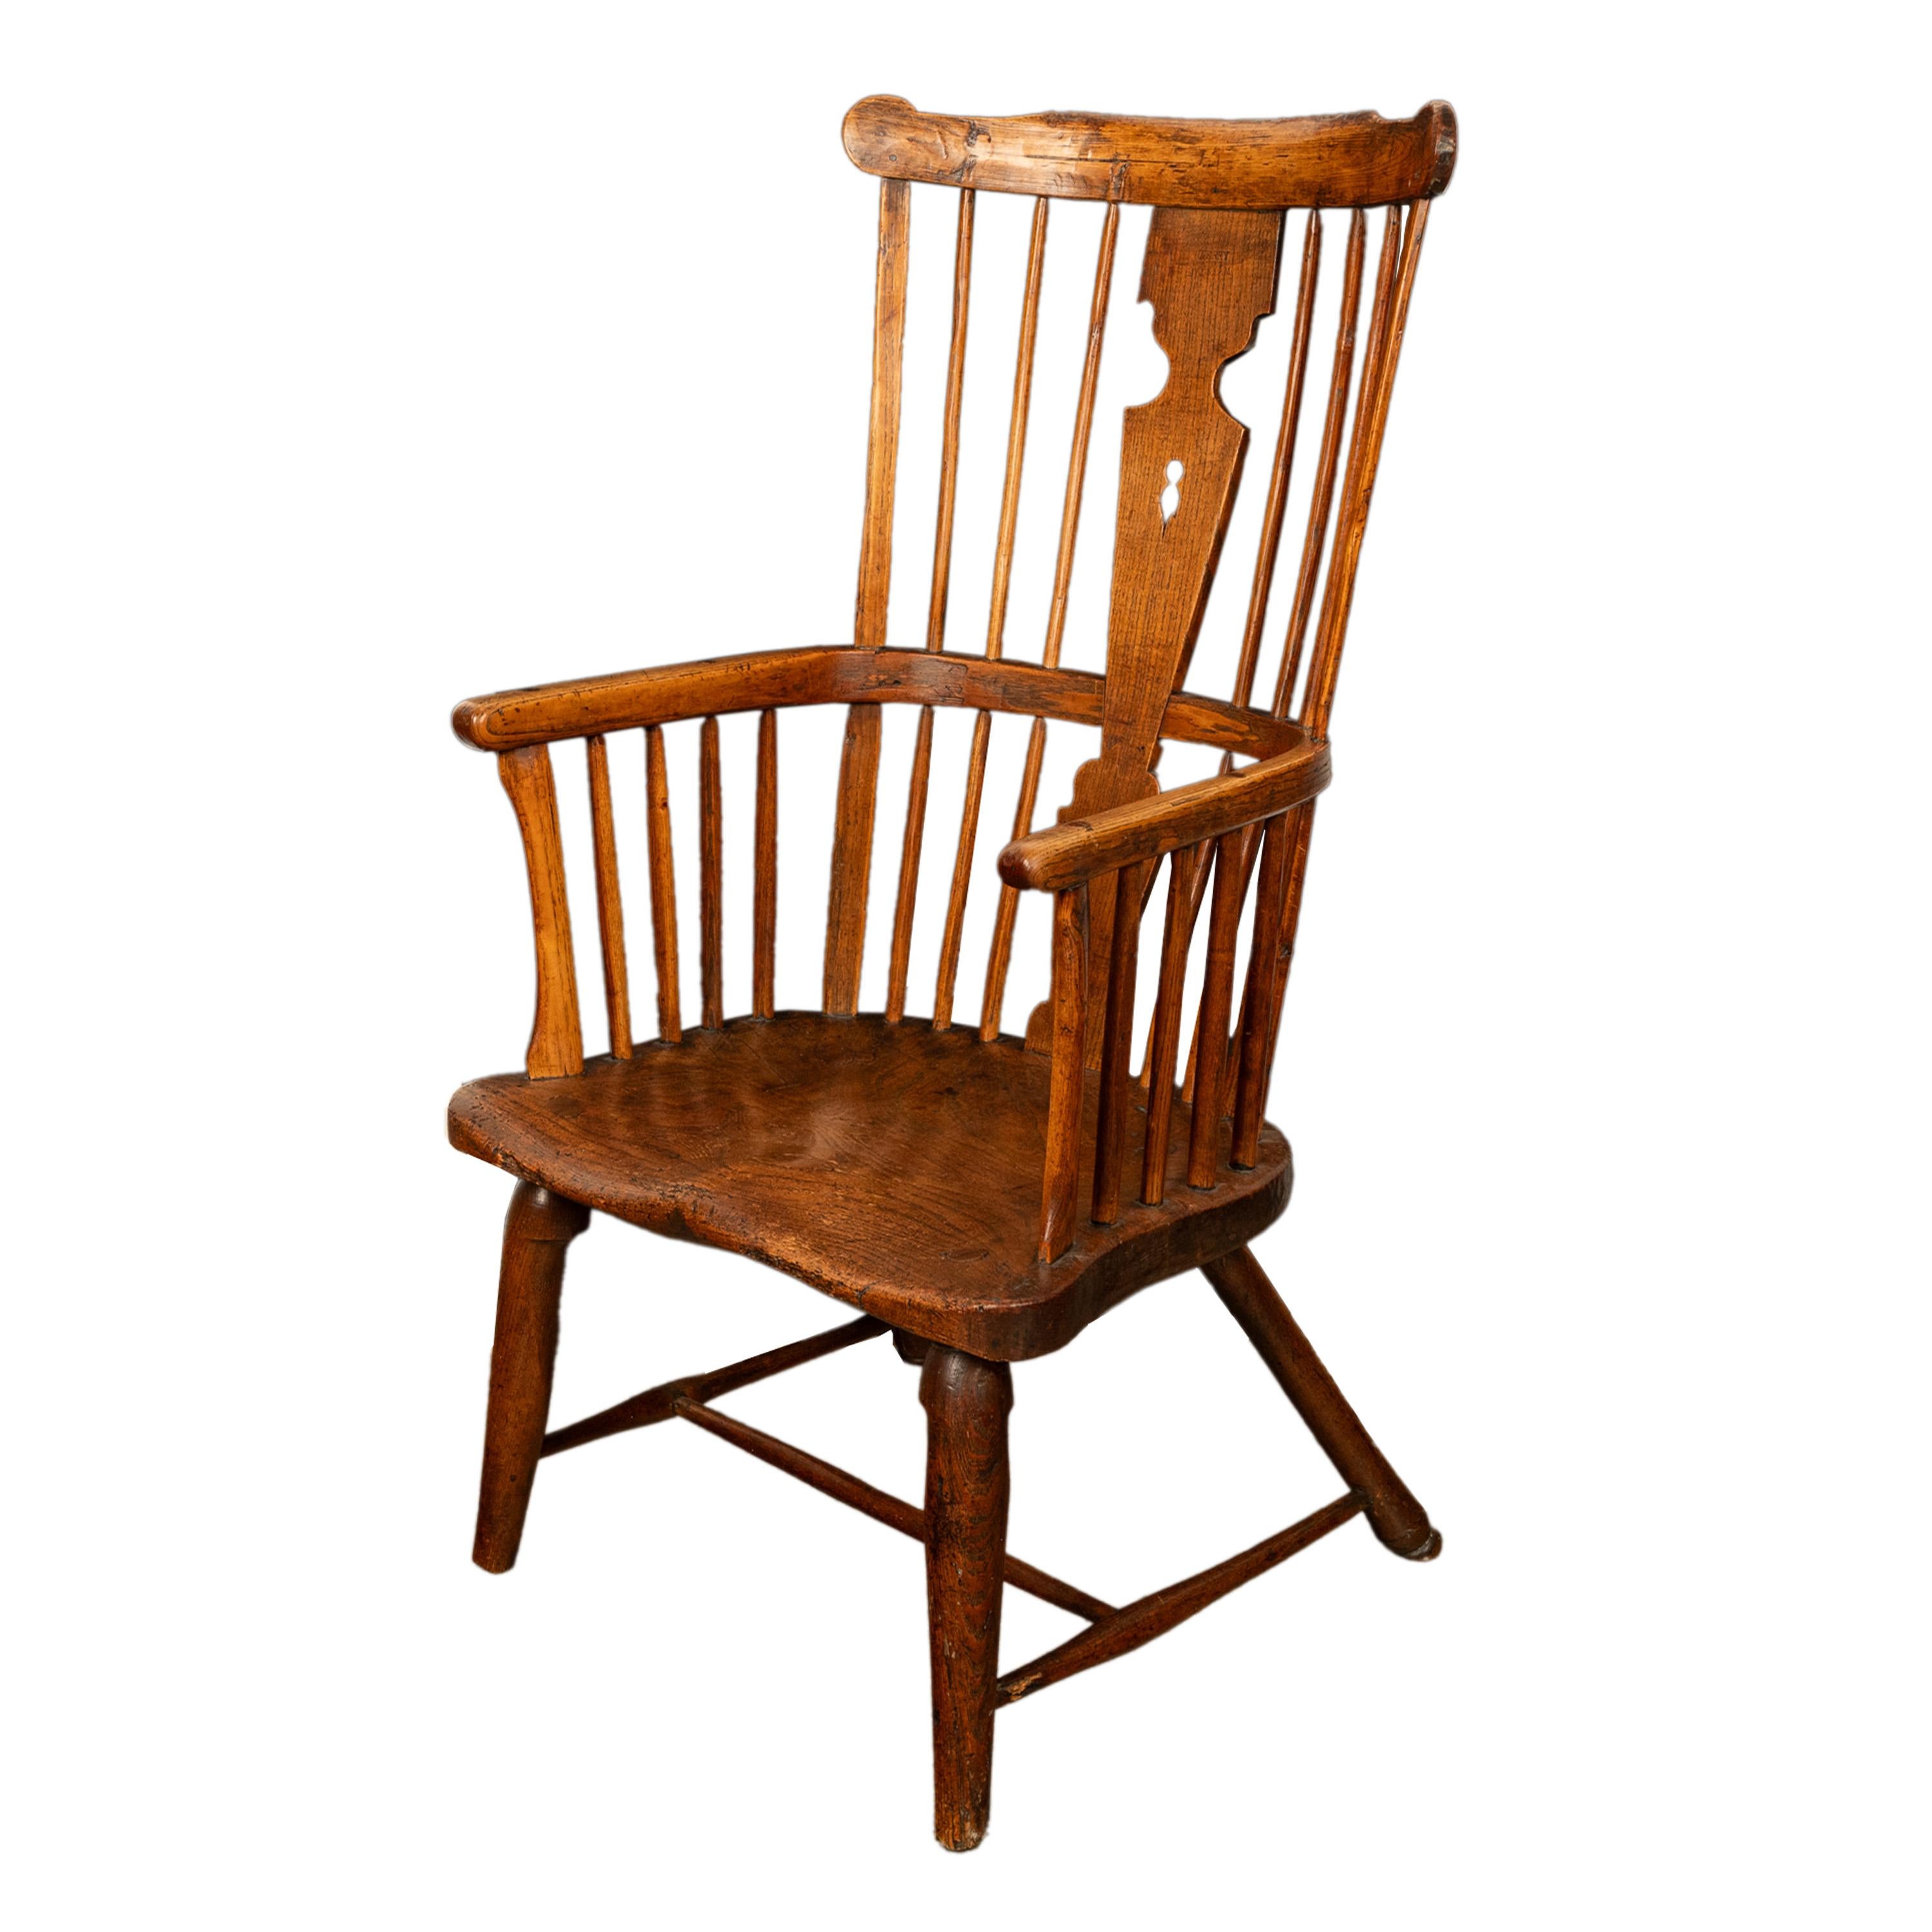 Georgian Important Antique Earliest Recorded English Windsor Chair by Kerry Evesham 1793 For Sale